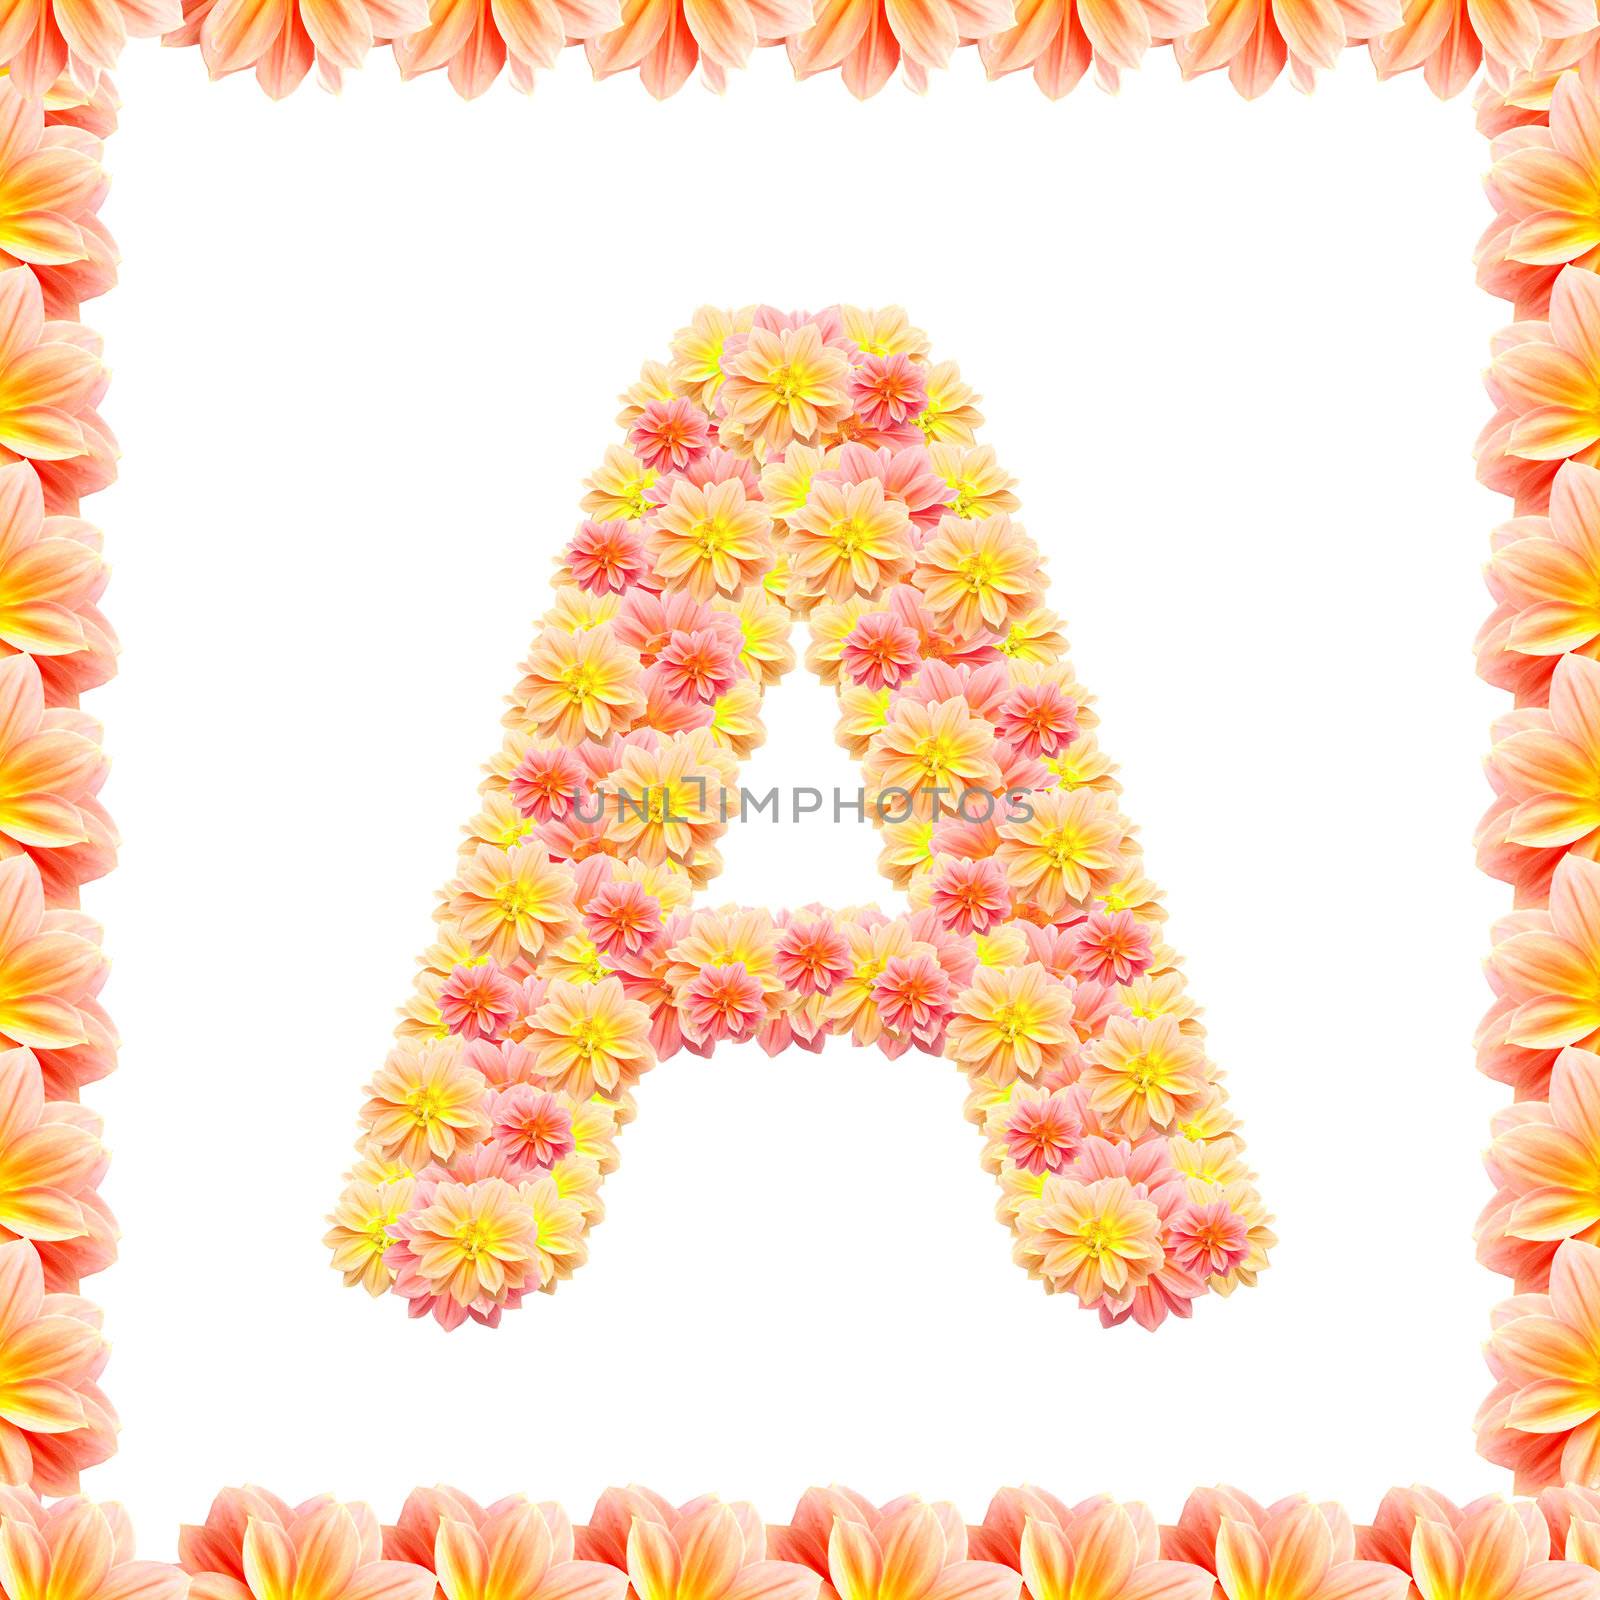 A,flower alphabet isolated on white with flame by jakgree